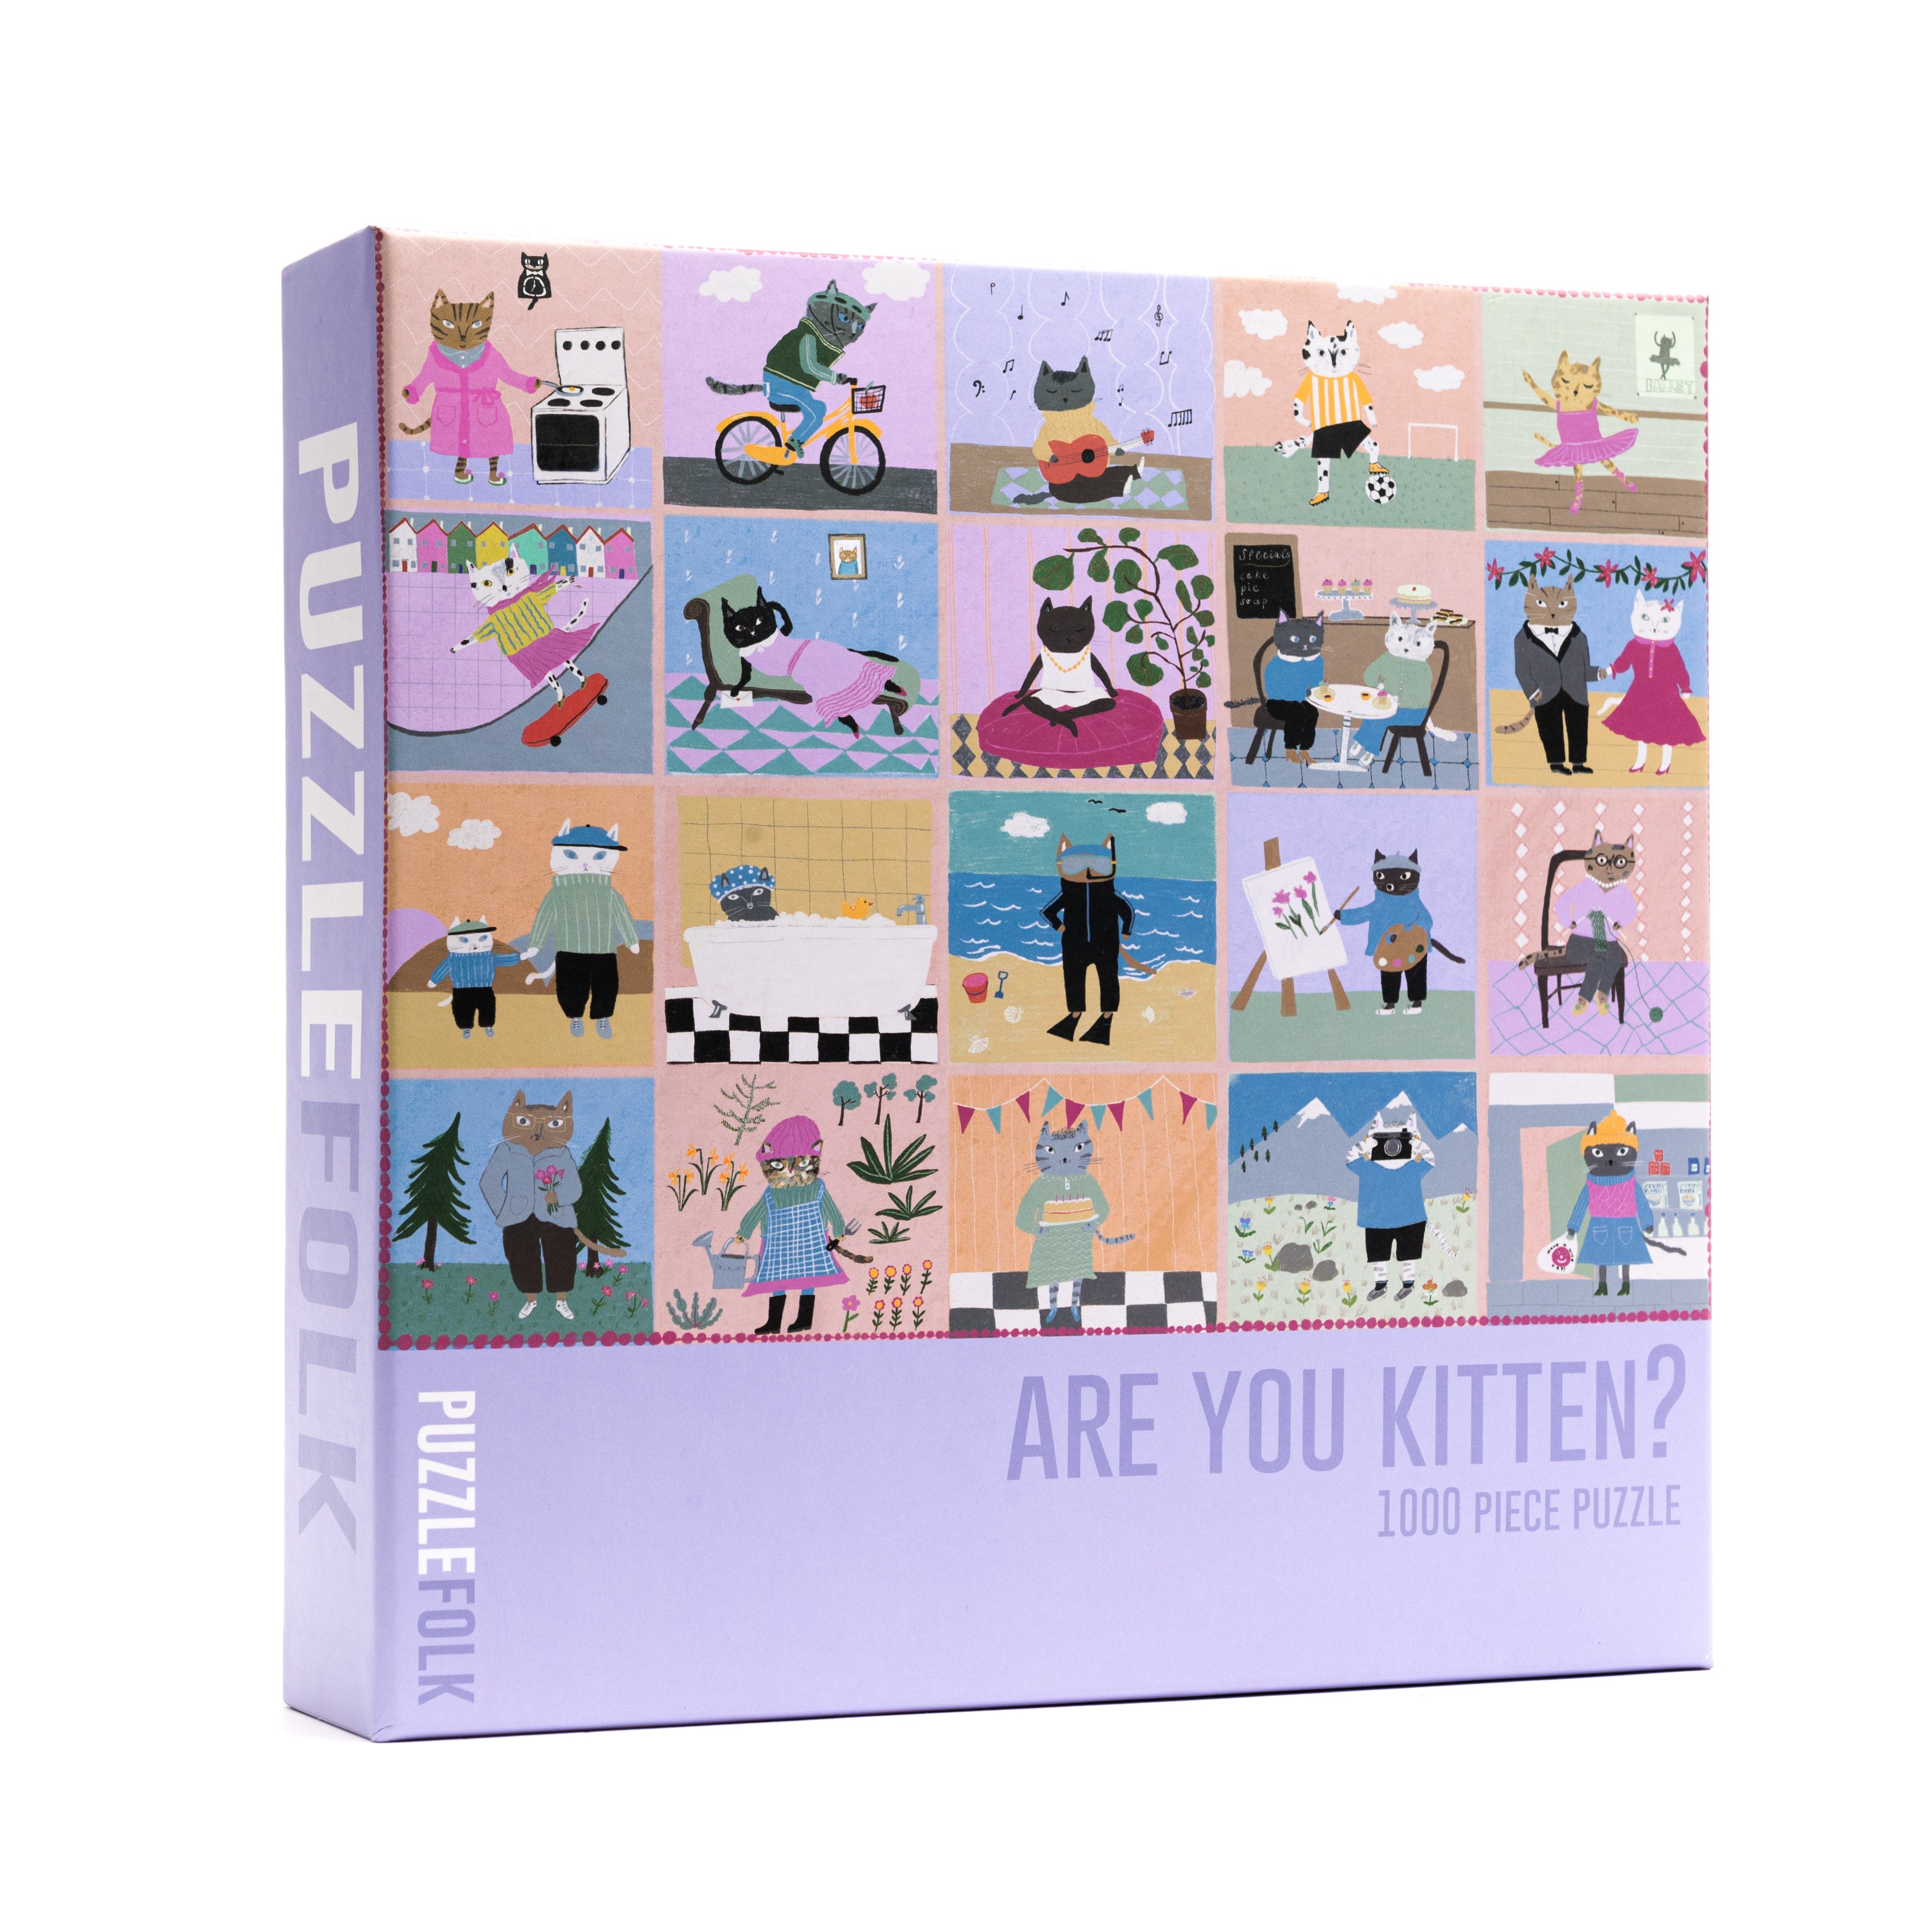 Are You Kitten?